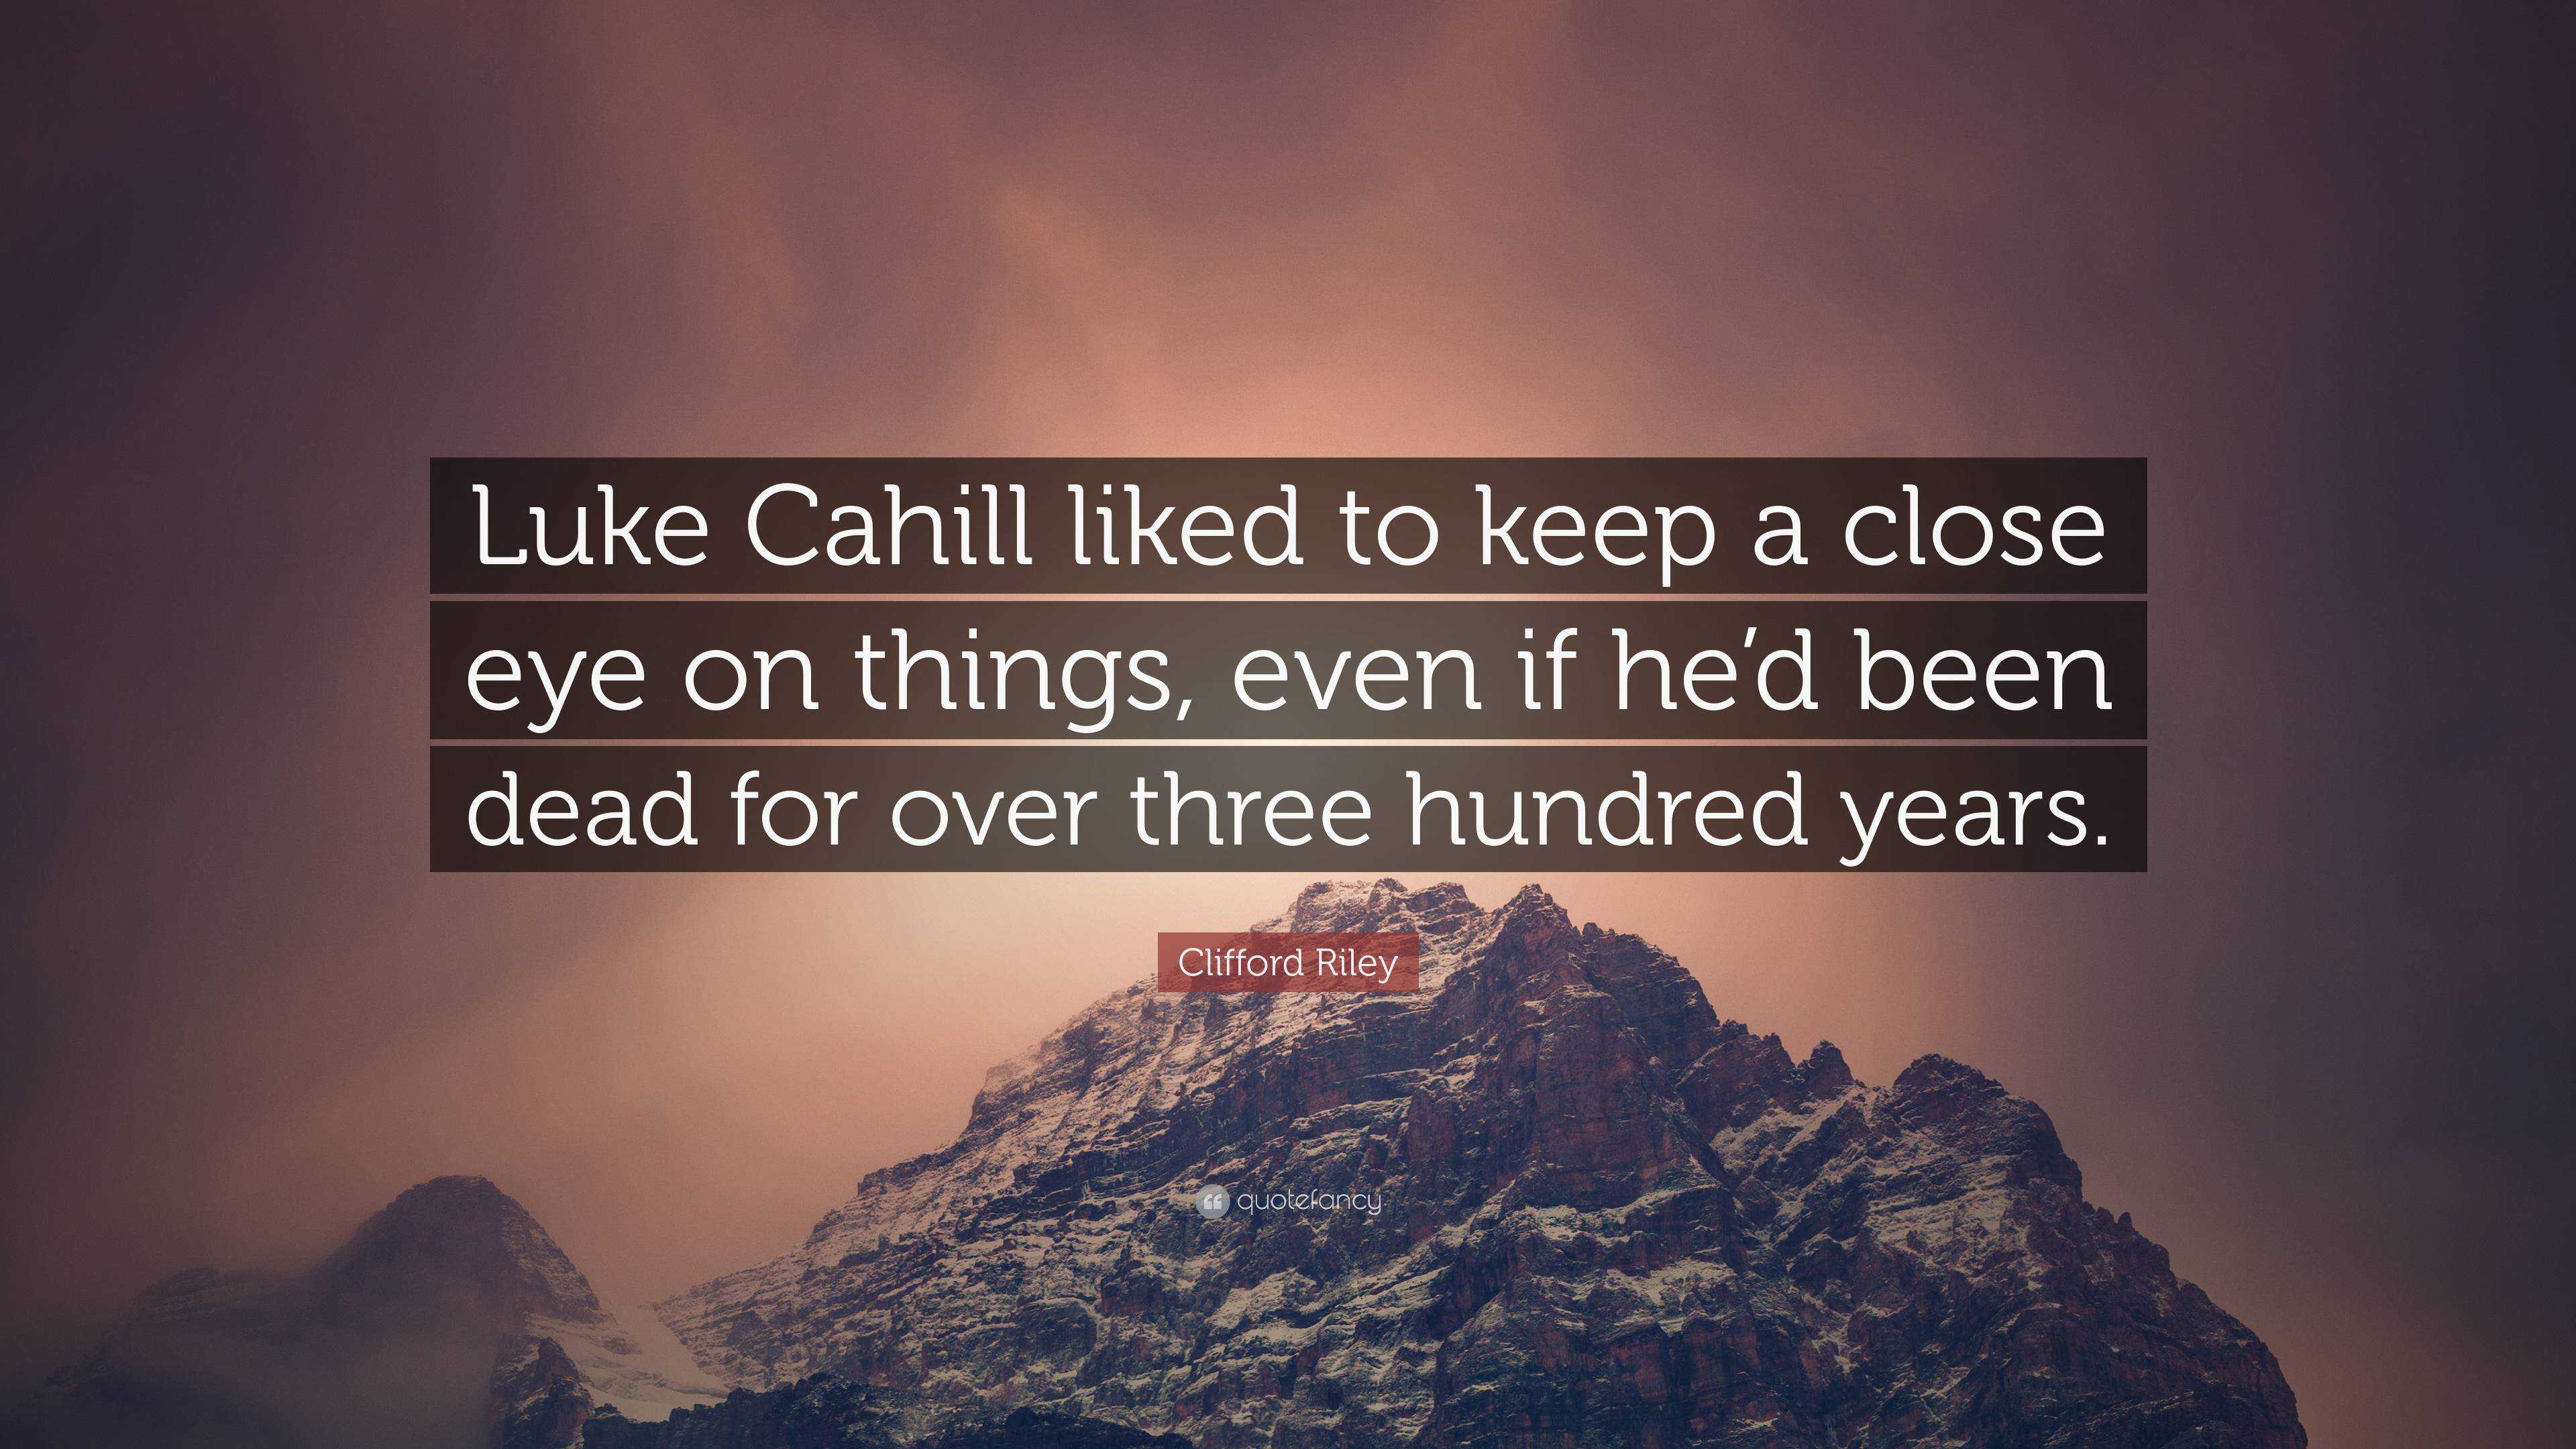 Clifford Riley Quote Luke Cahill Liked To Keep A Close Eye On Things Even If He